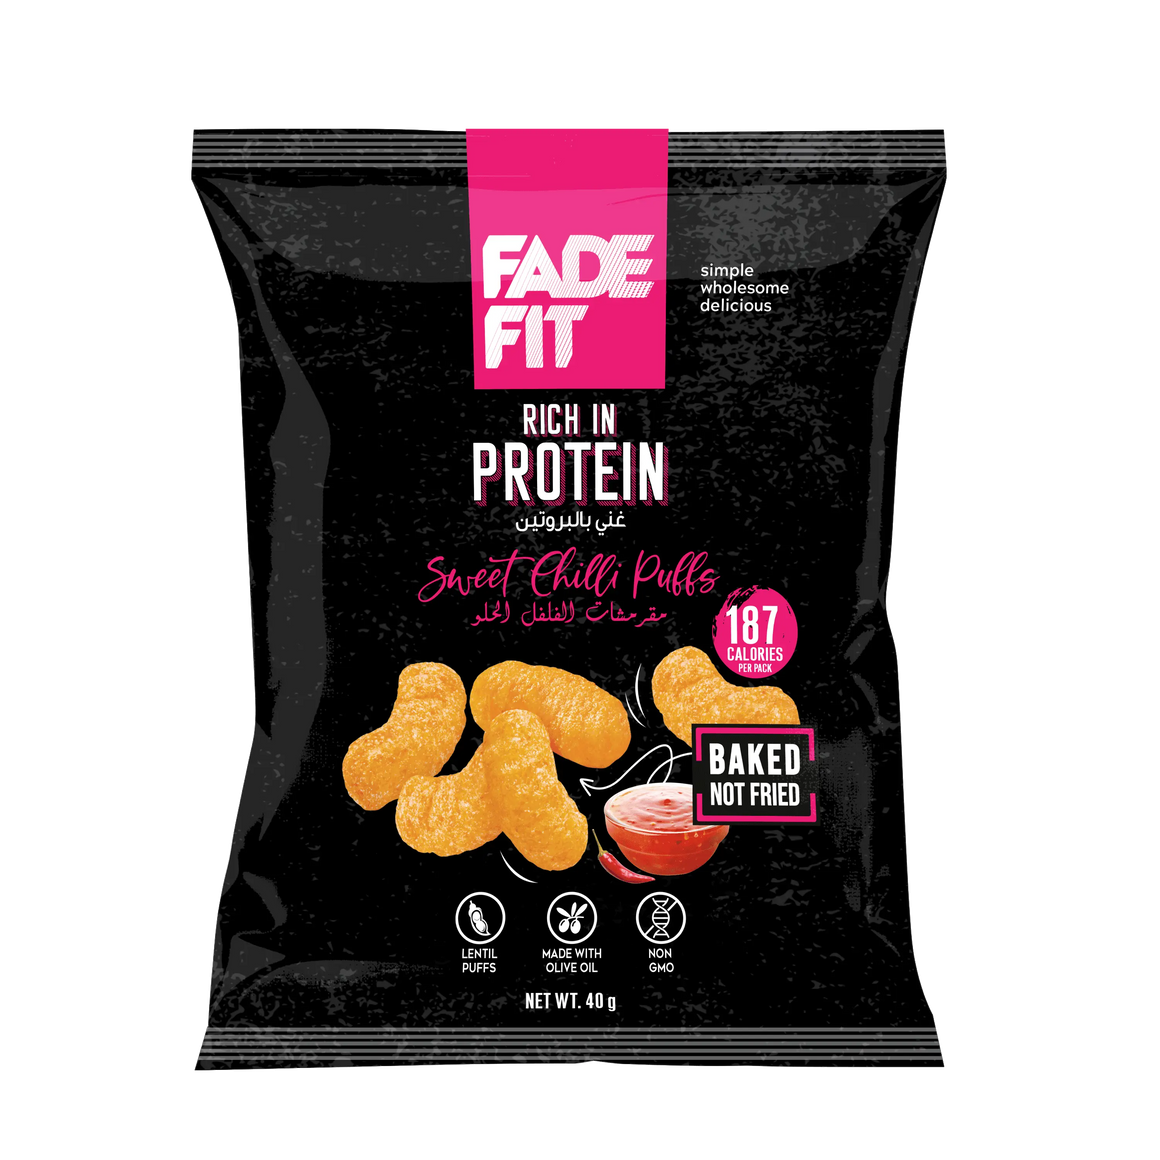 Fade Fit - Sweet Chilli Puffs, Rich in Protein, Baked, NON GMO 40gm Fade Fit